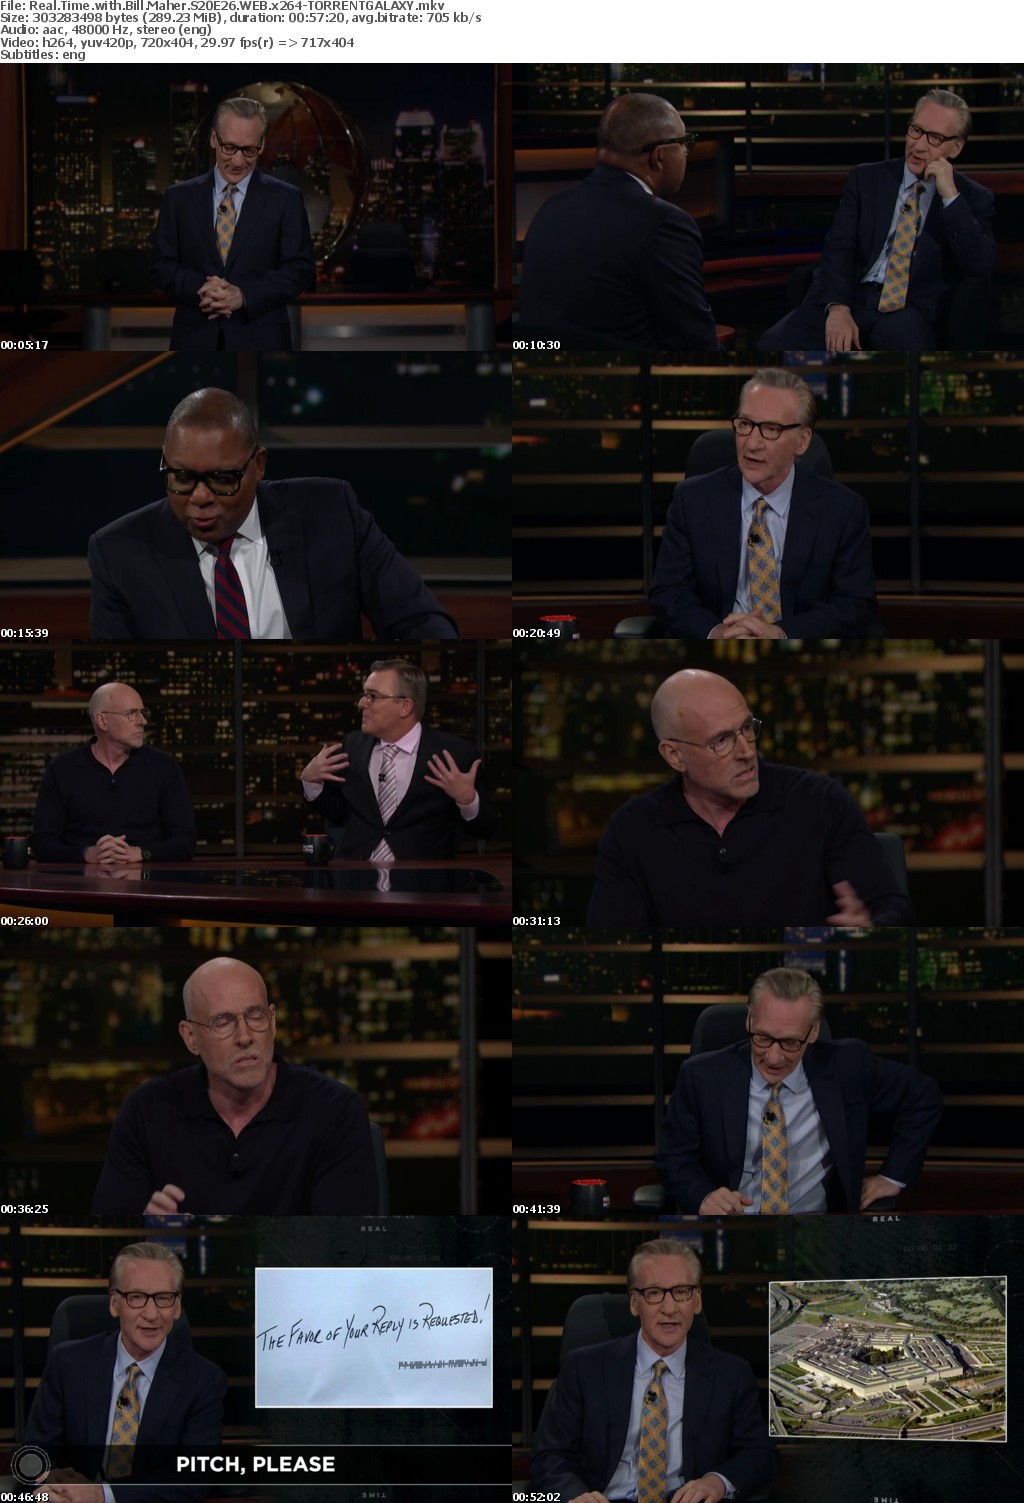 Real Time with Bill Maher S20E26 WEB x264-GALAXY